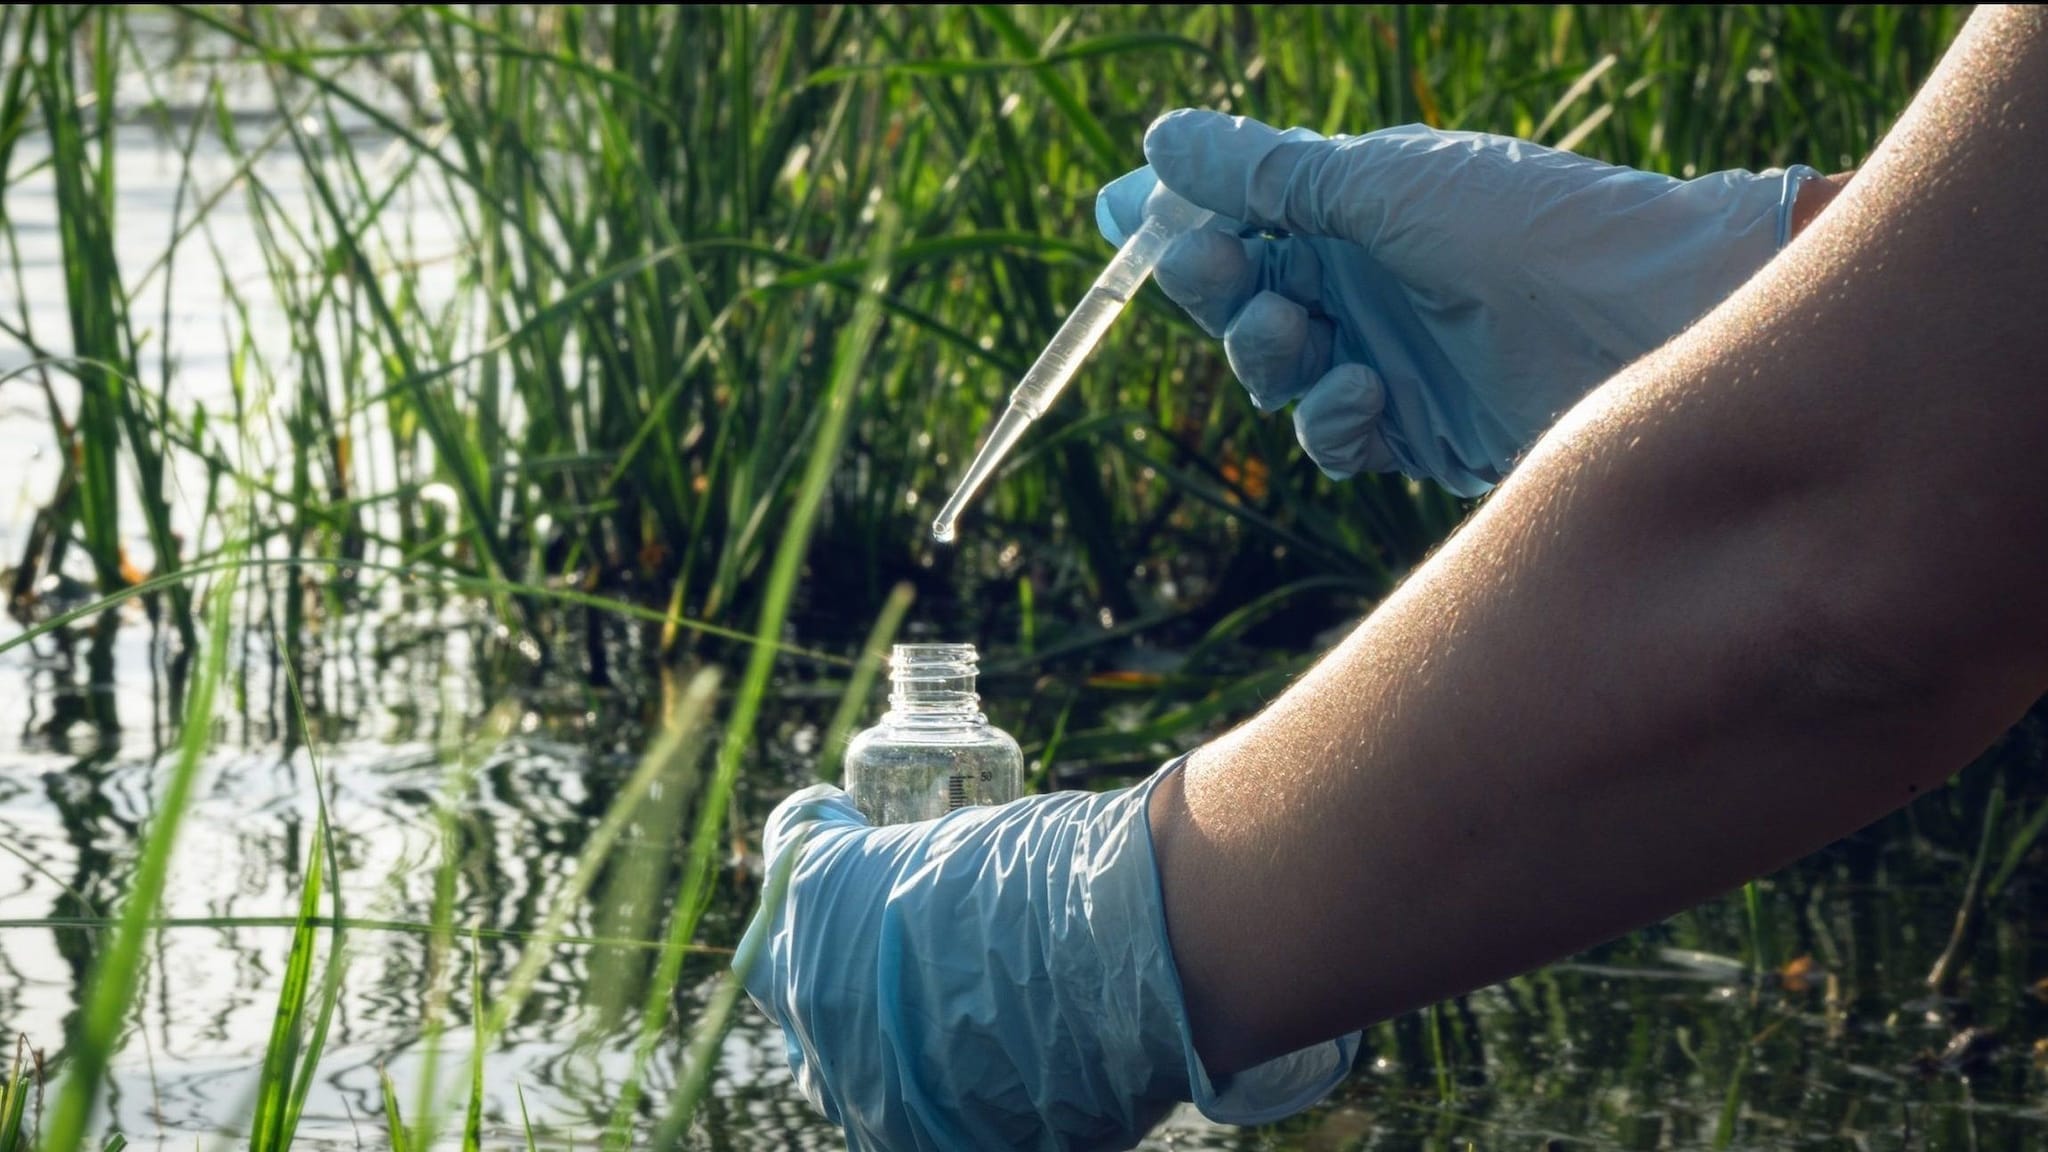 Person wearing blue gloves collecting water samples from a pond.